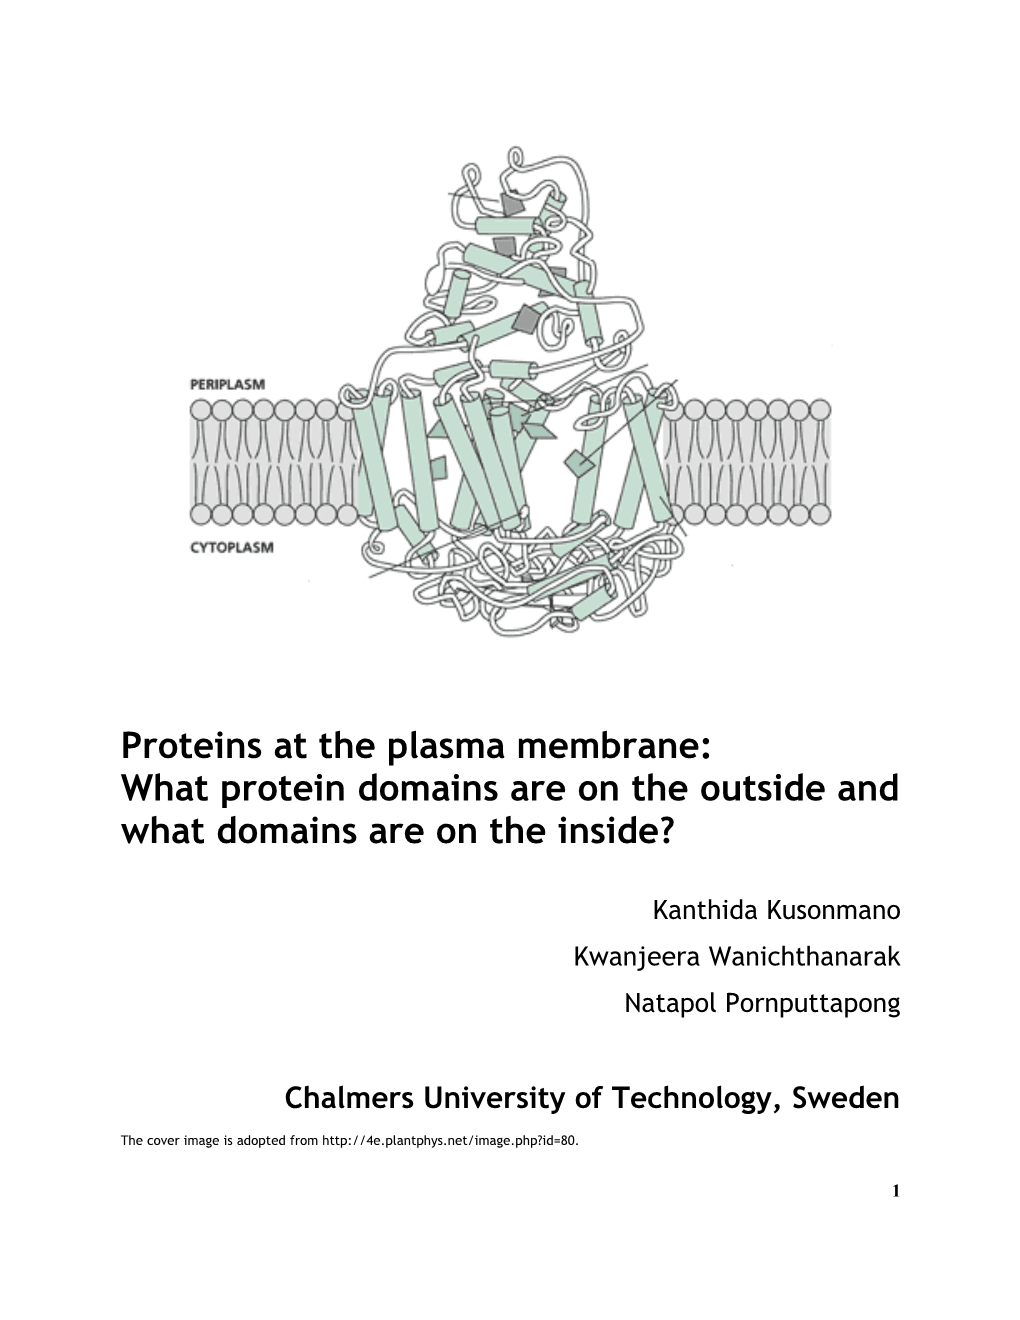 Proteins at the Plasma Membrane: What Protein Domains Are on the Outside and What Domains Are on the Inside?